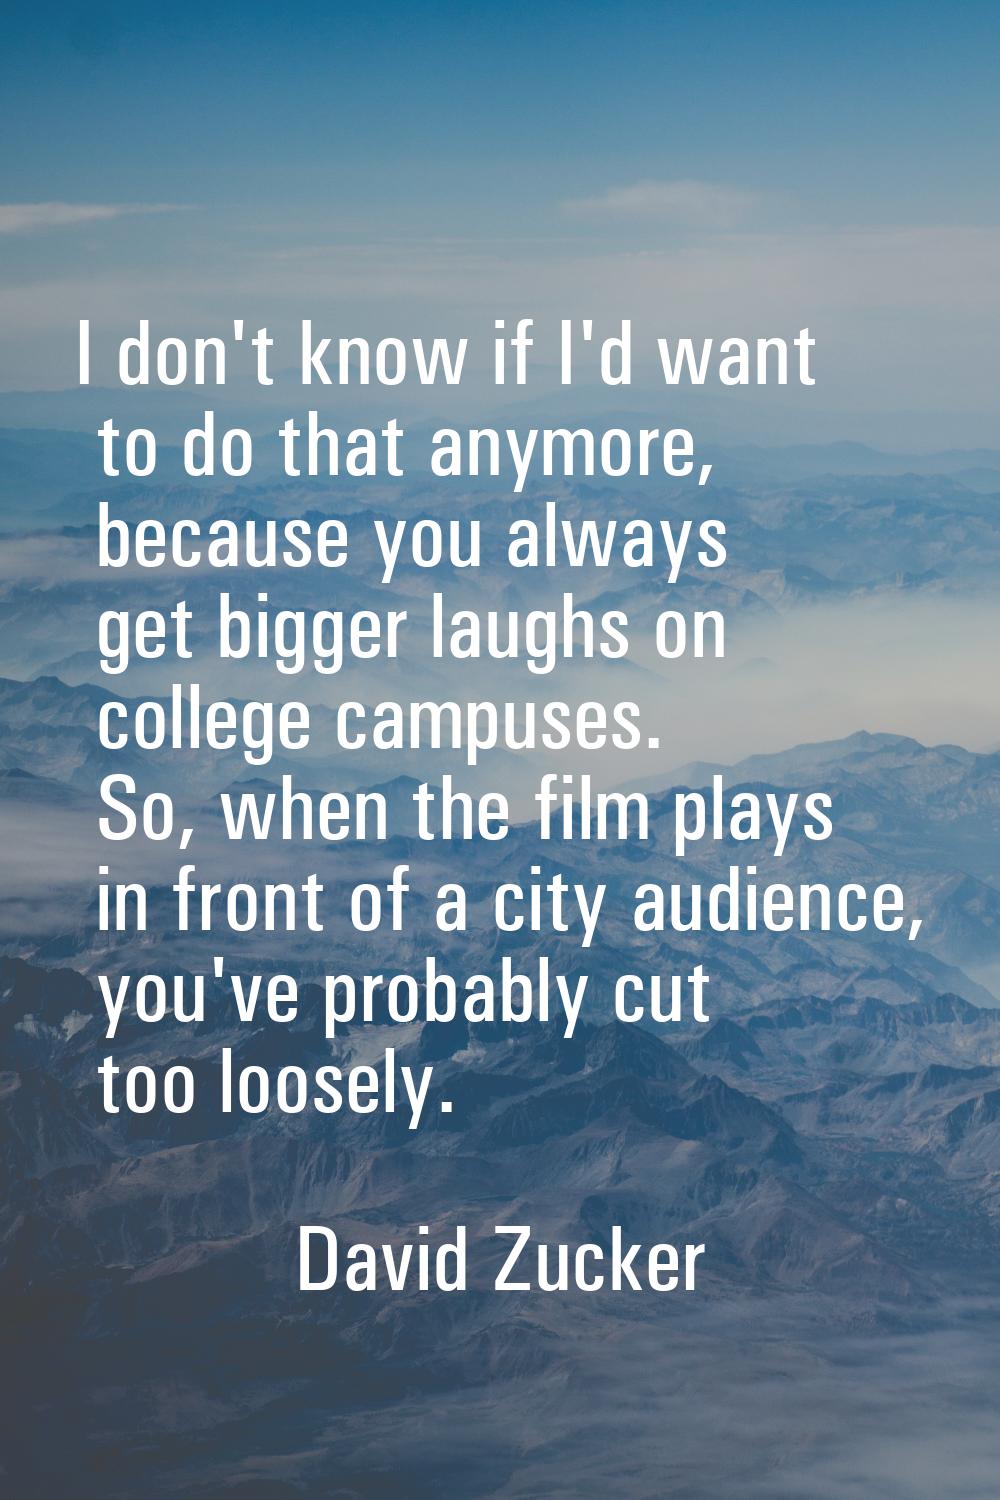 I don't know if I'd want to do that anymore, because you always get bigger laughs on college campus